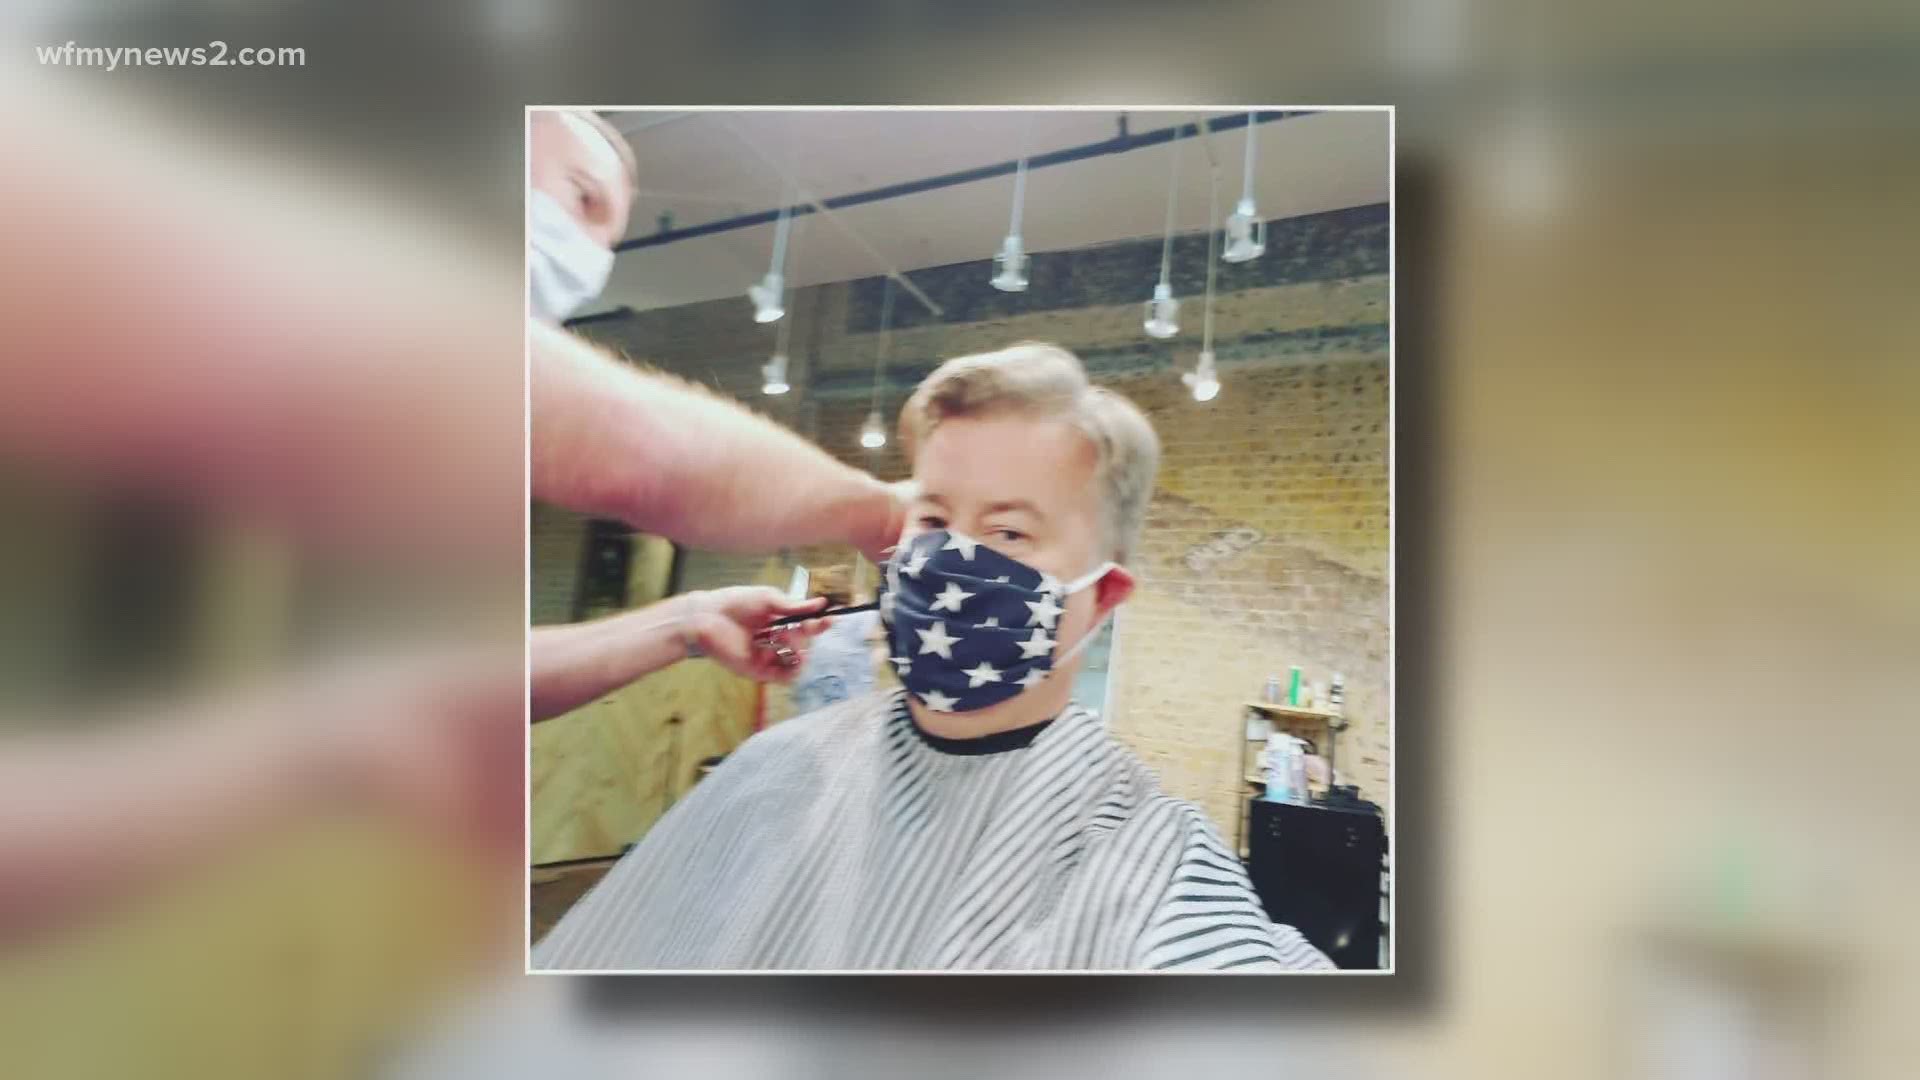 When hair salons closed, we all felt the impact of quarantine hair. Eric Chilton shows us the progression, and finale, of his quarantine hair.